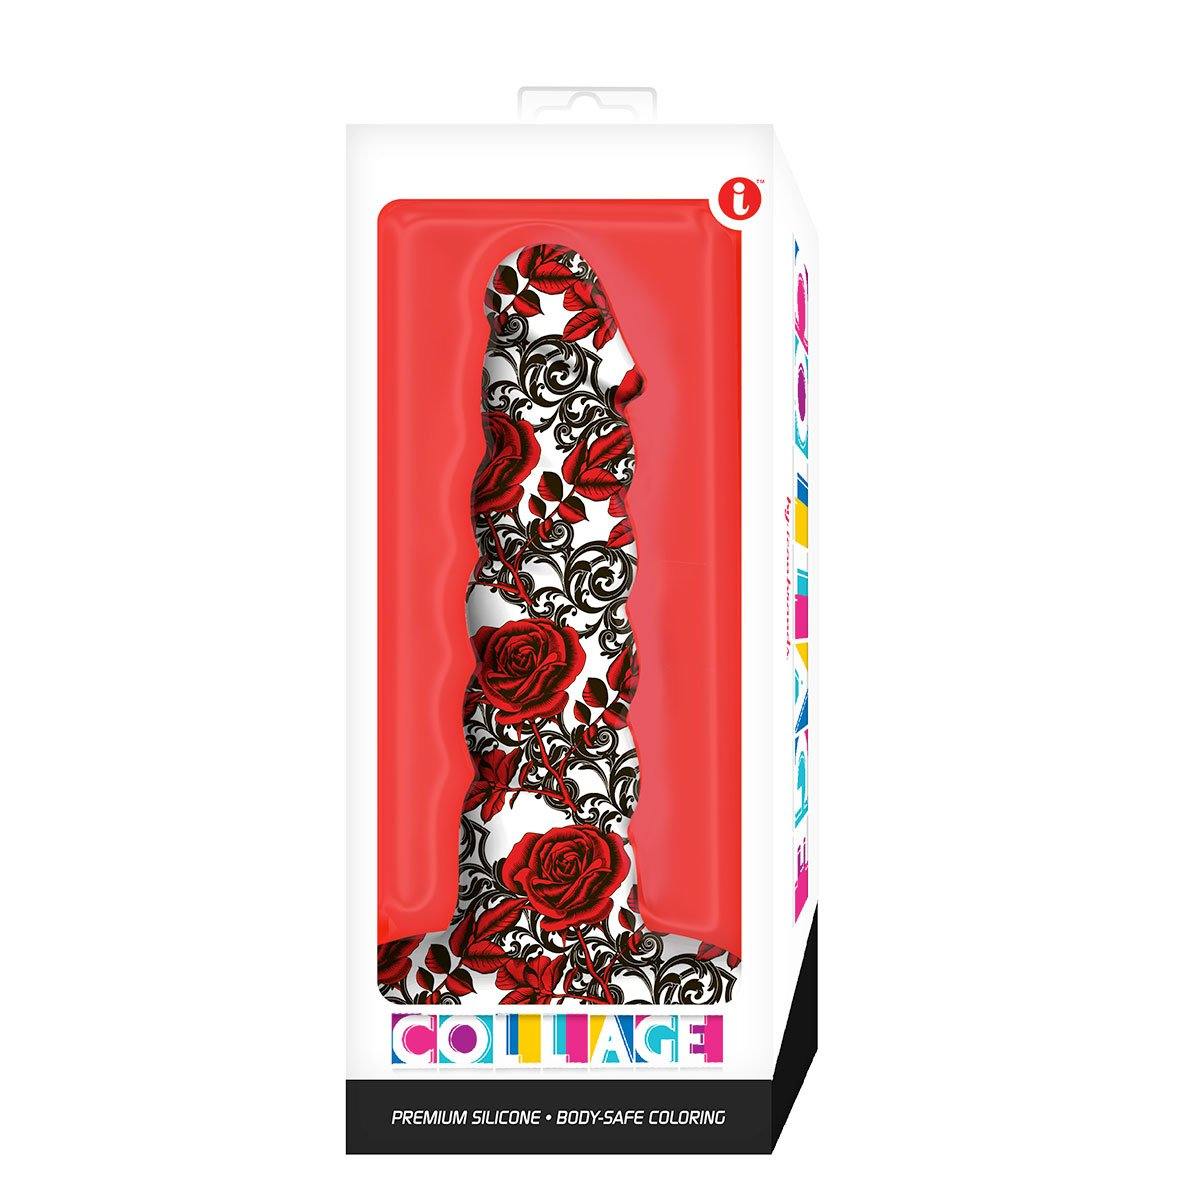 Icon Brands Collage Iron Rose Twisted Silicone Dil - Buy At Luxury Toy X - Free 3-Day Shipping